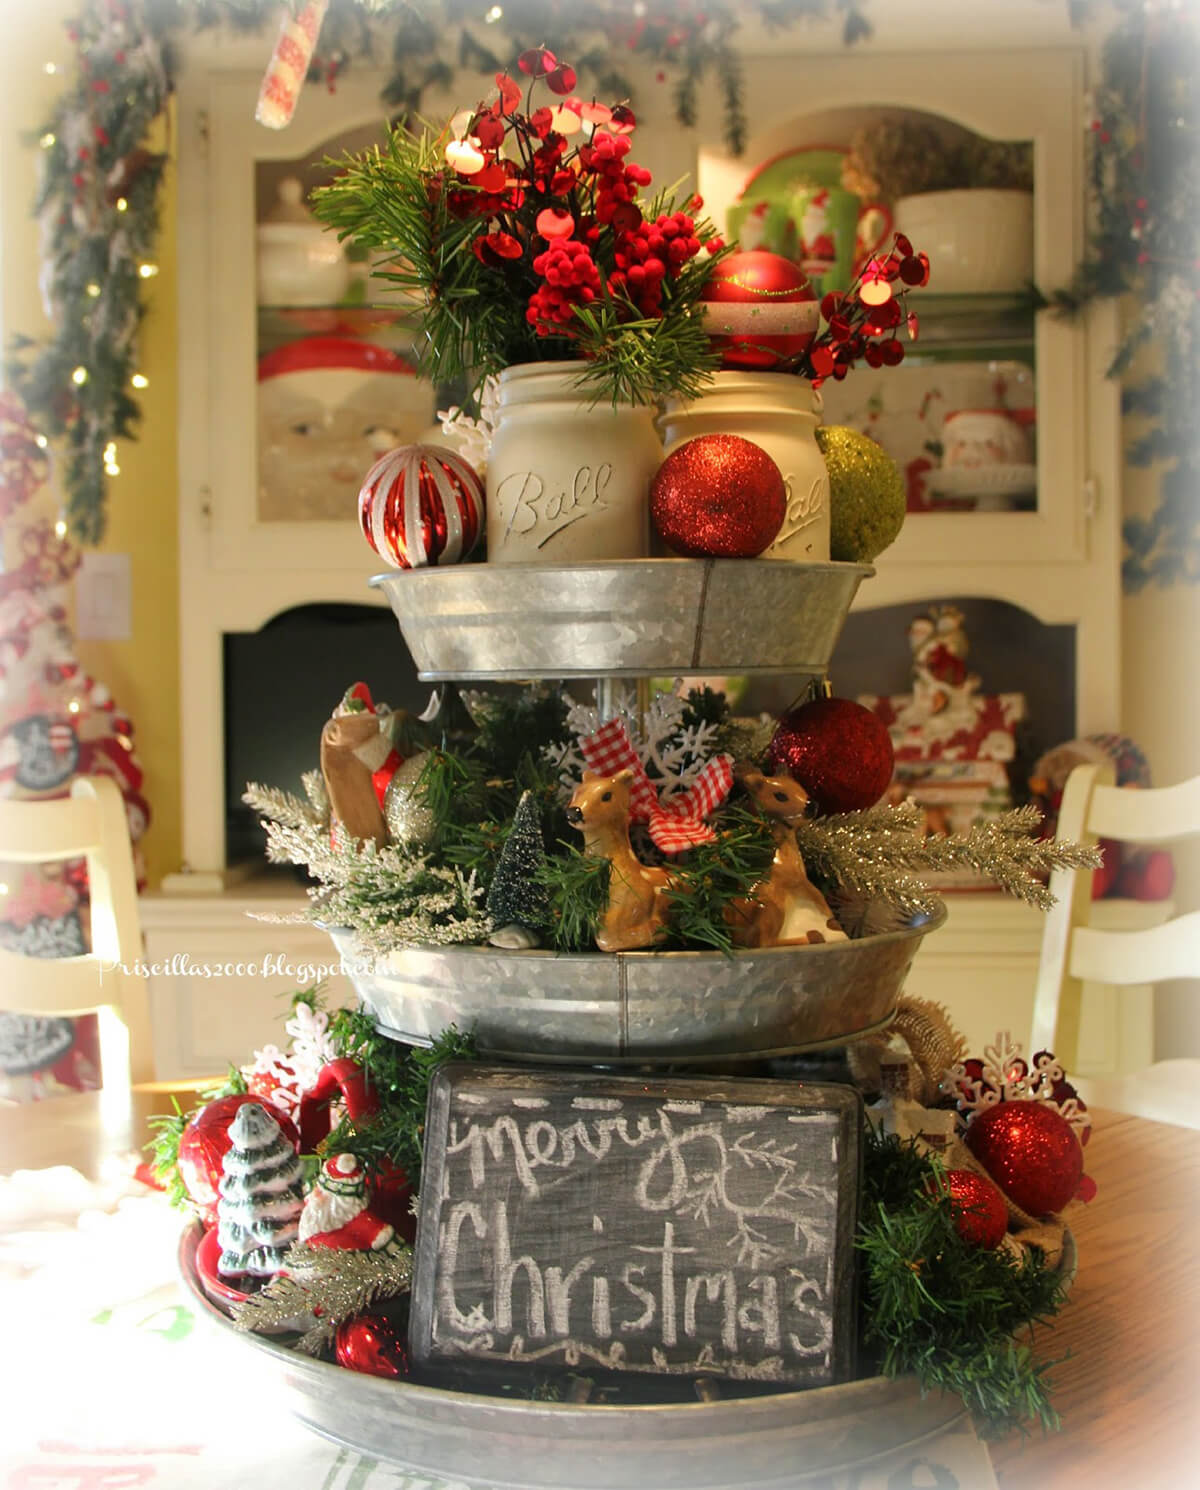 16 Lovely DIY Christmas Centerpiece Projects You Can Make Over The Weekend